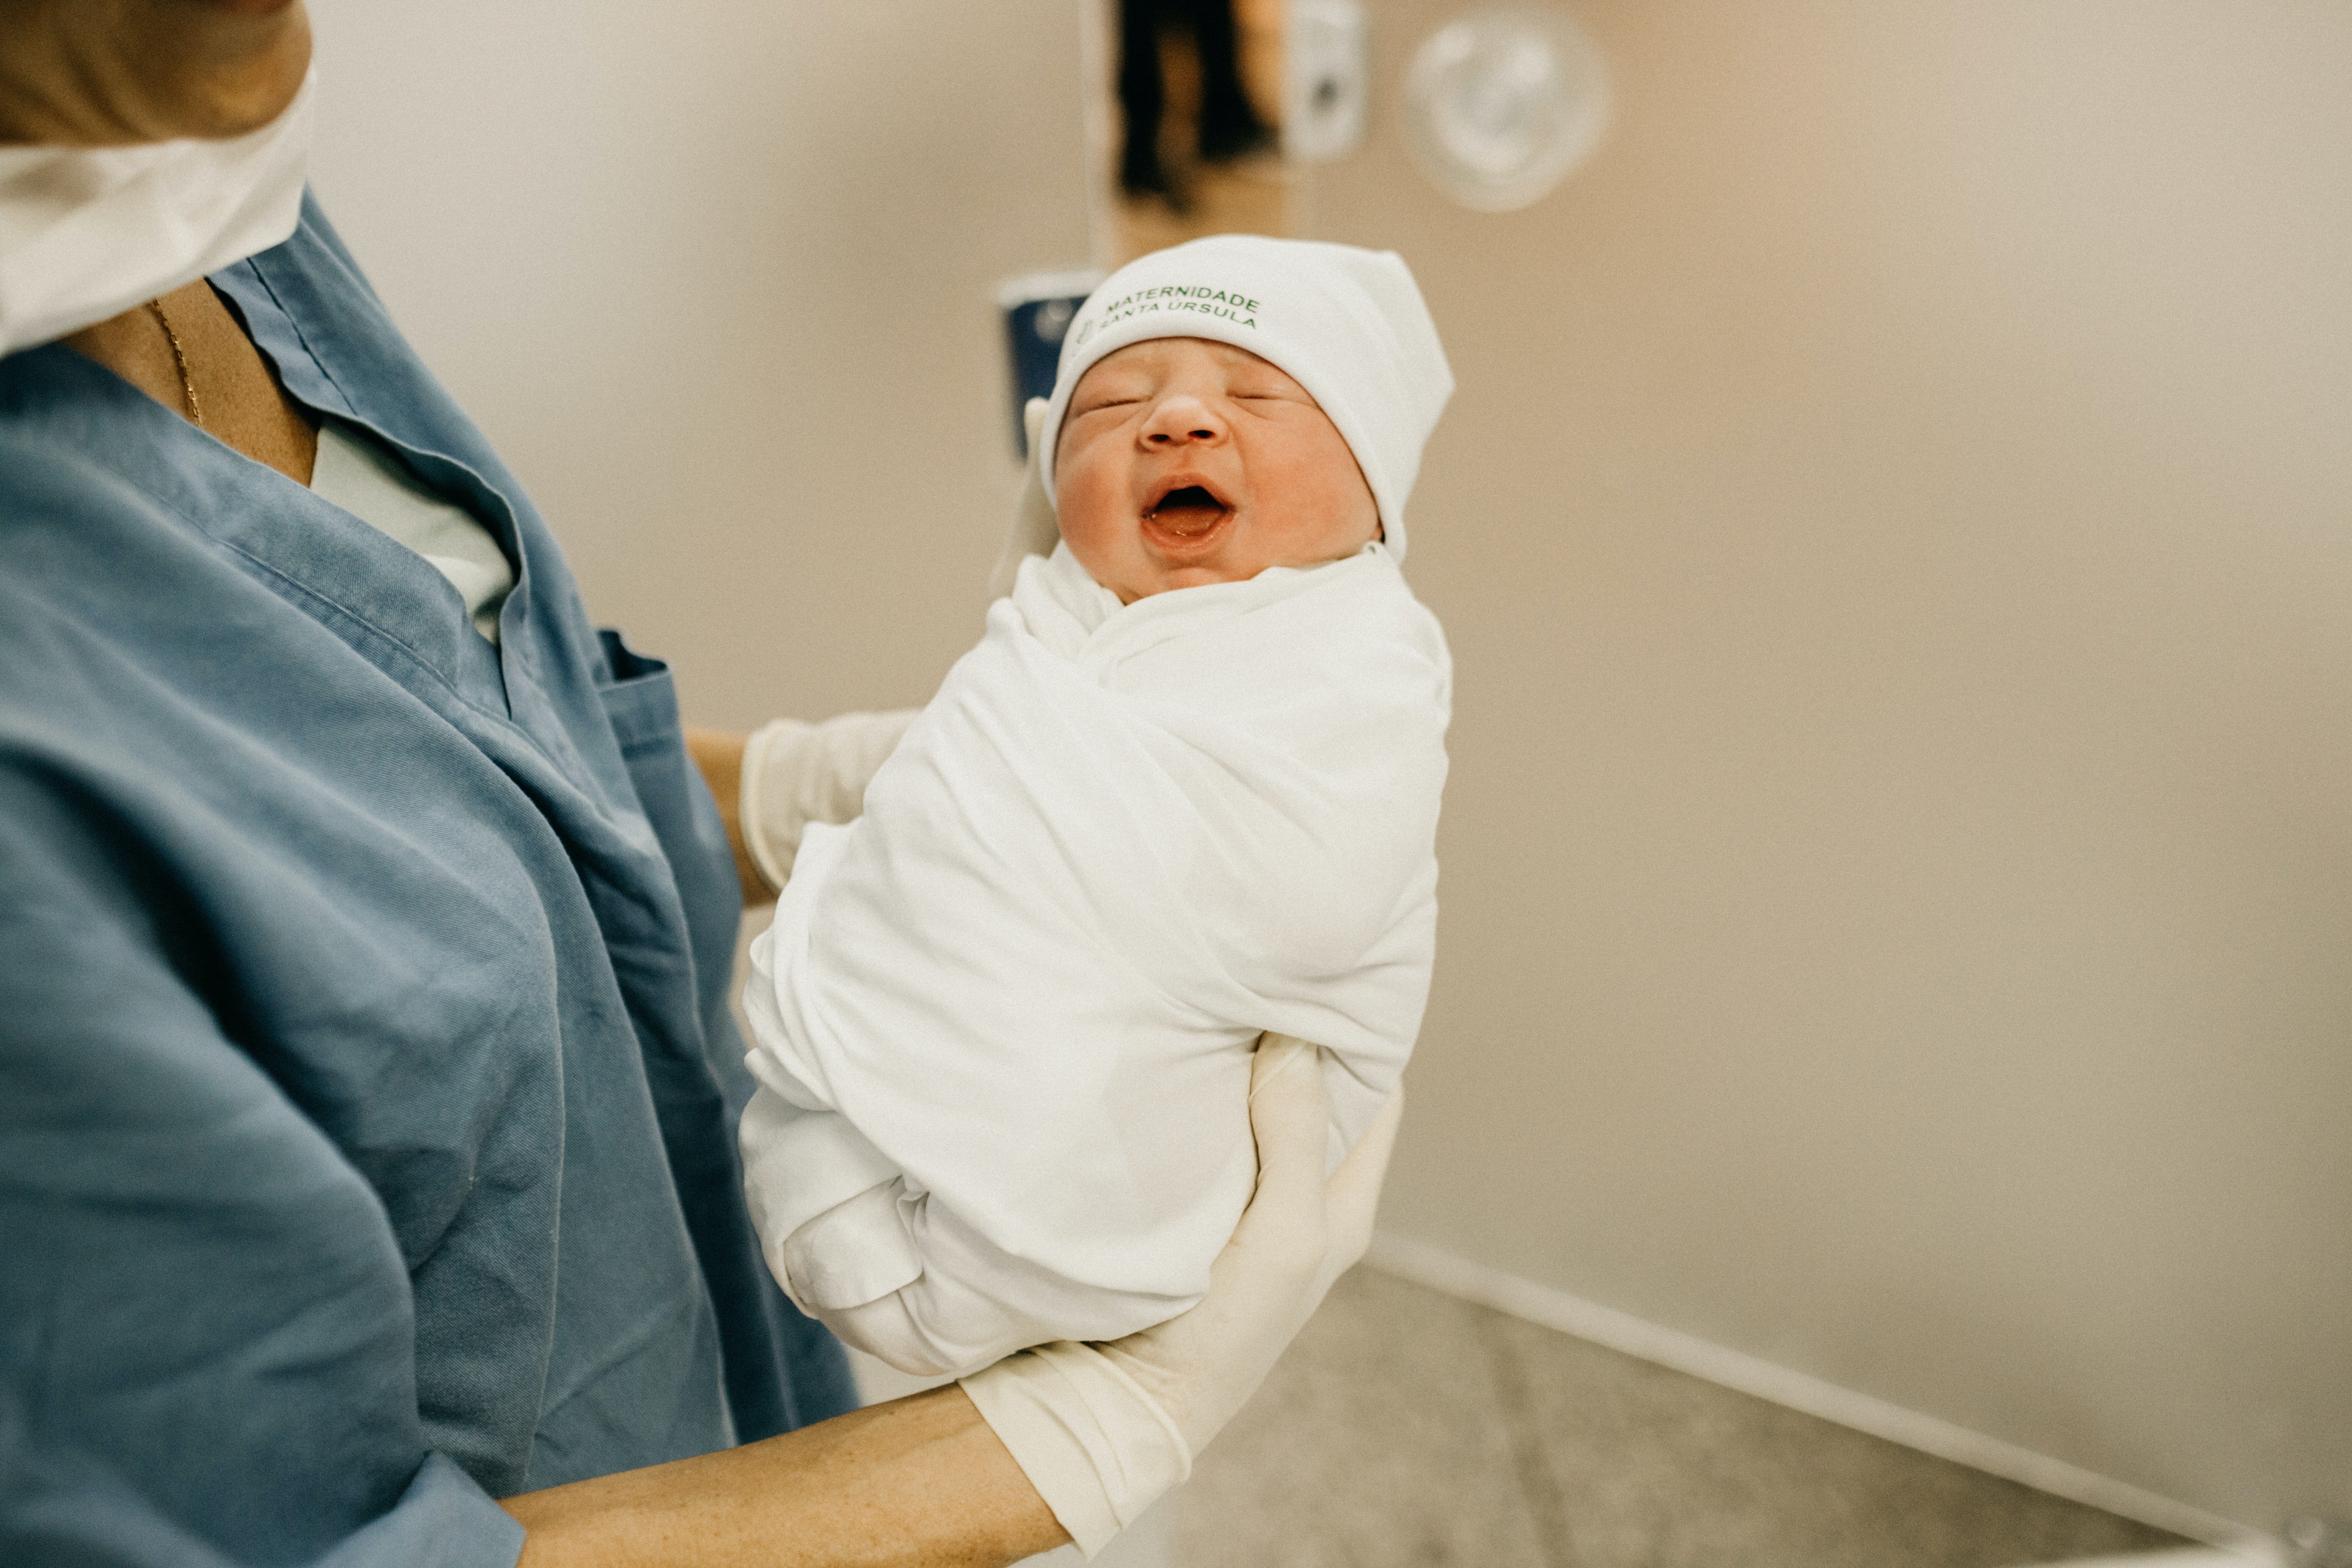 The 18-year-old girl's baby was healthy and well. | Source: Unsplash